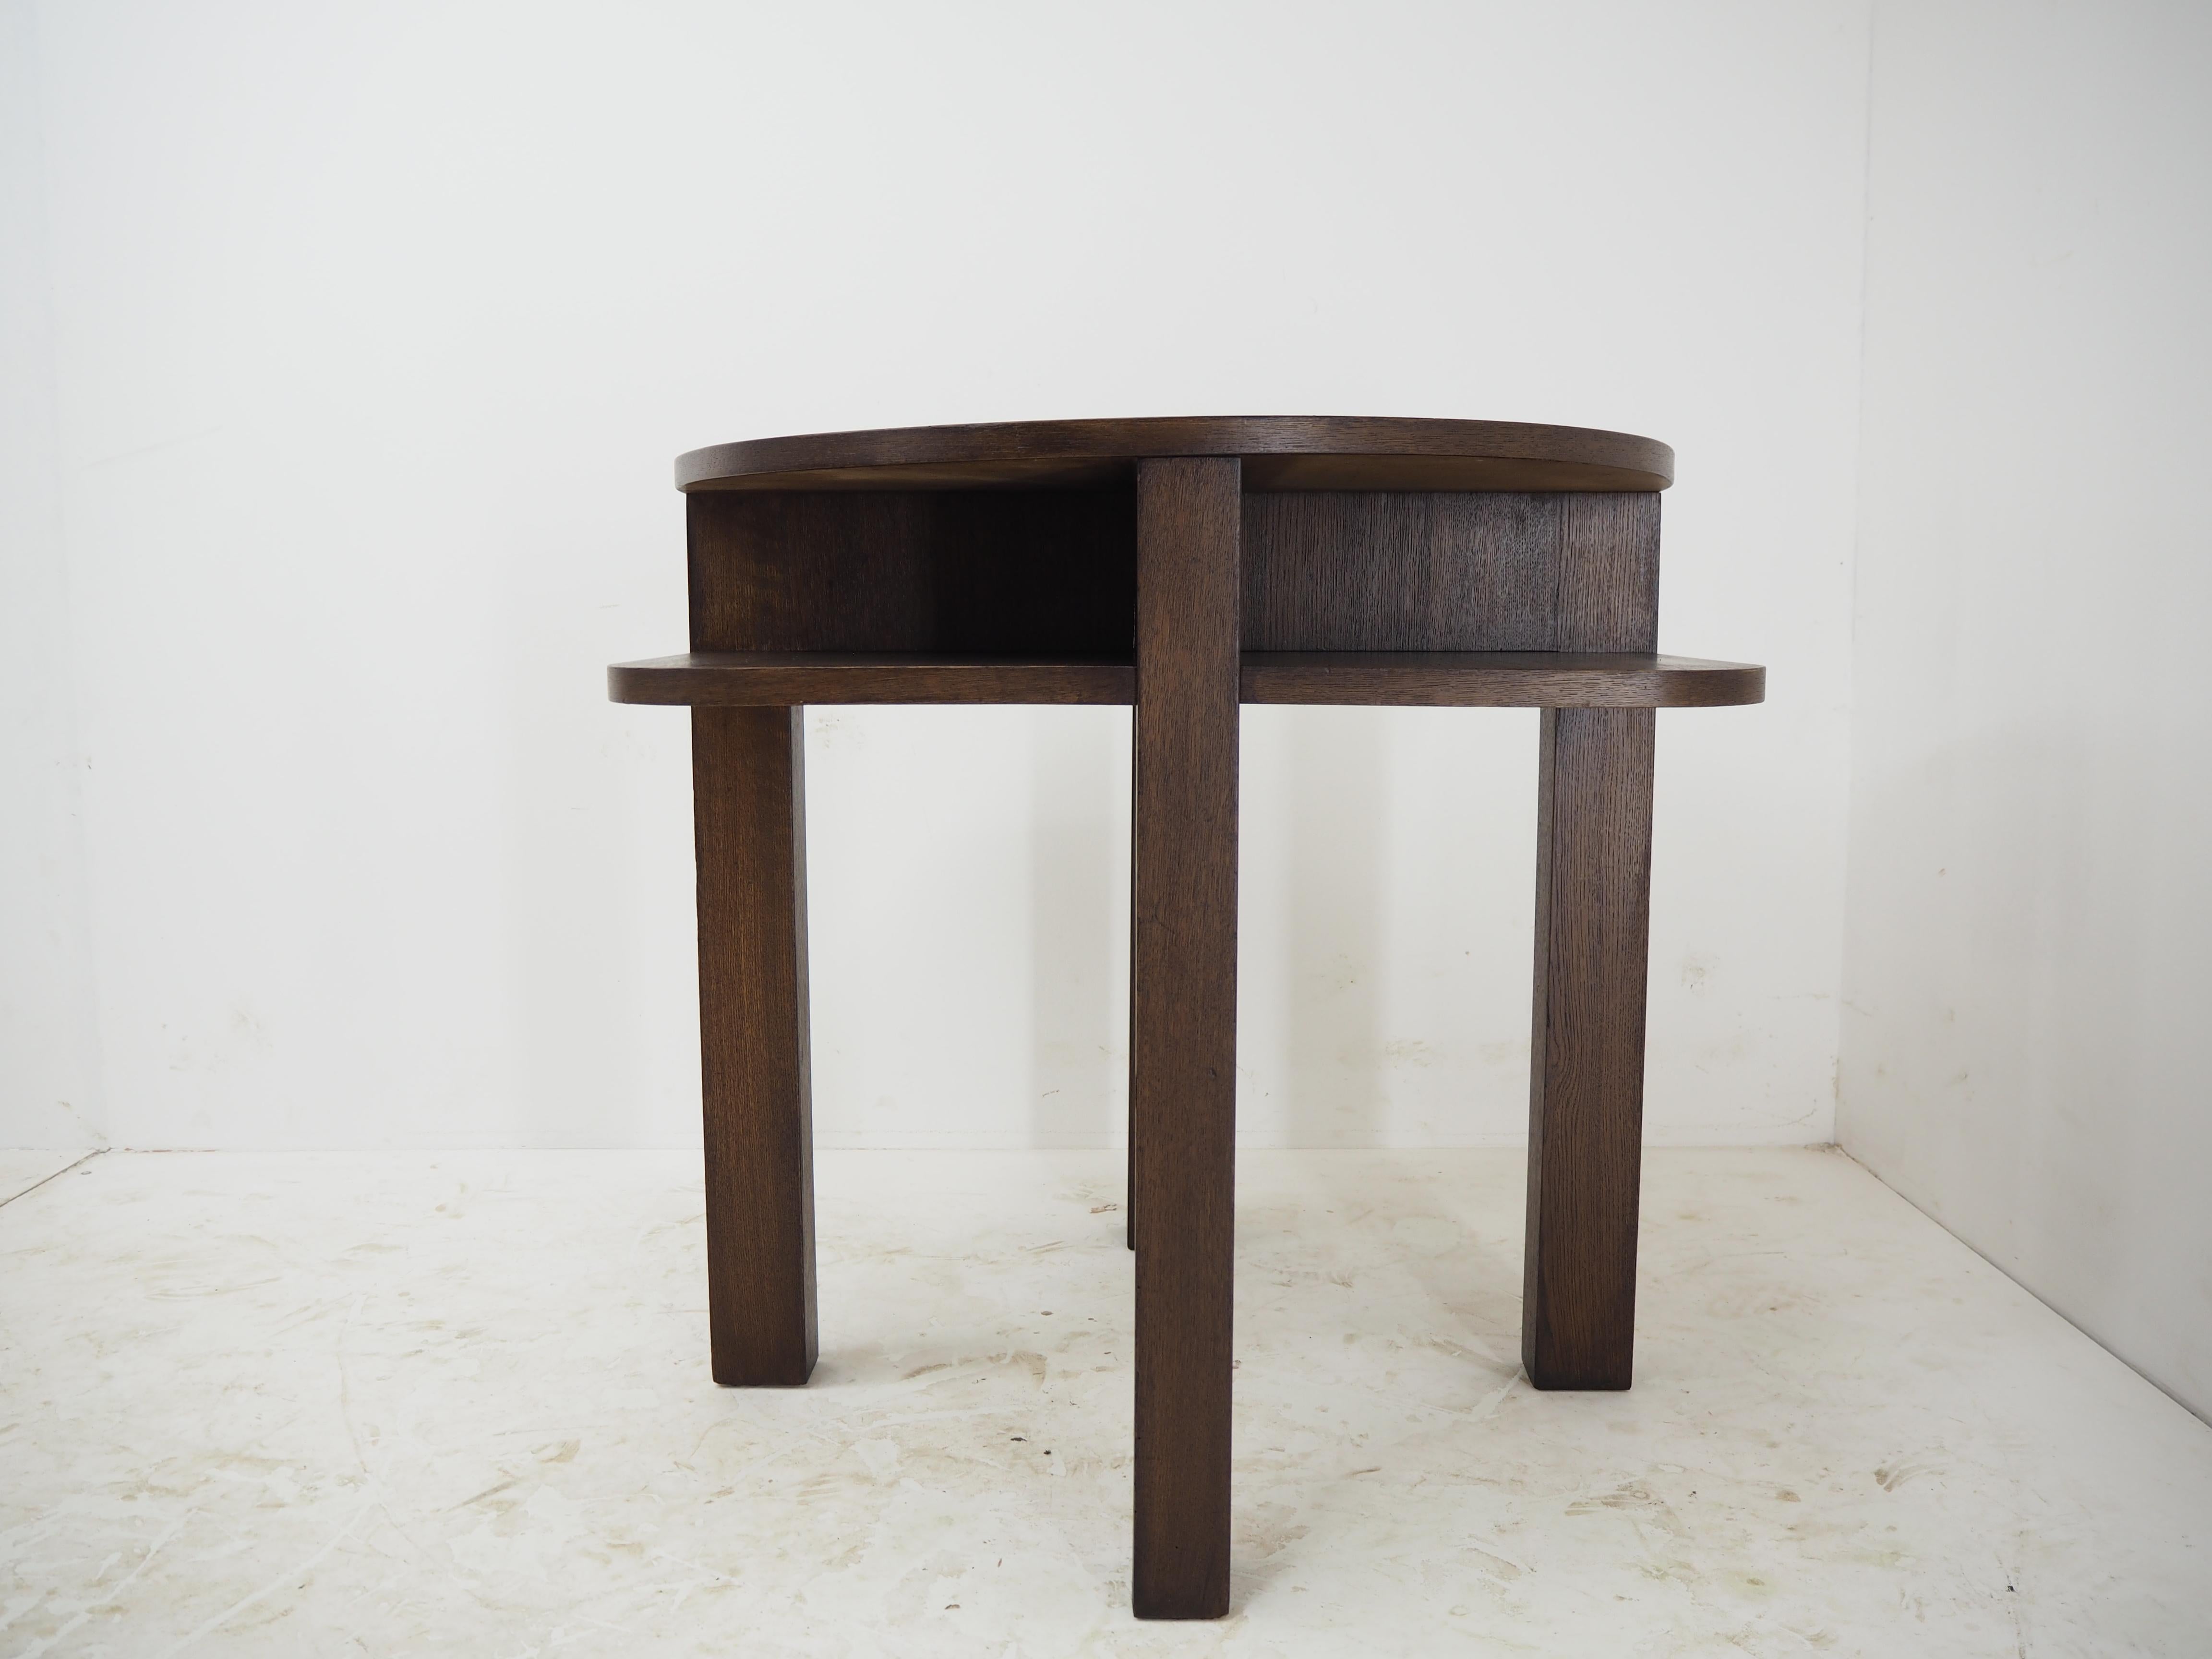 European Art Deco Side Table, Europe, 1930s For Sale